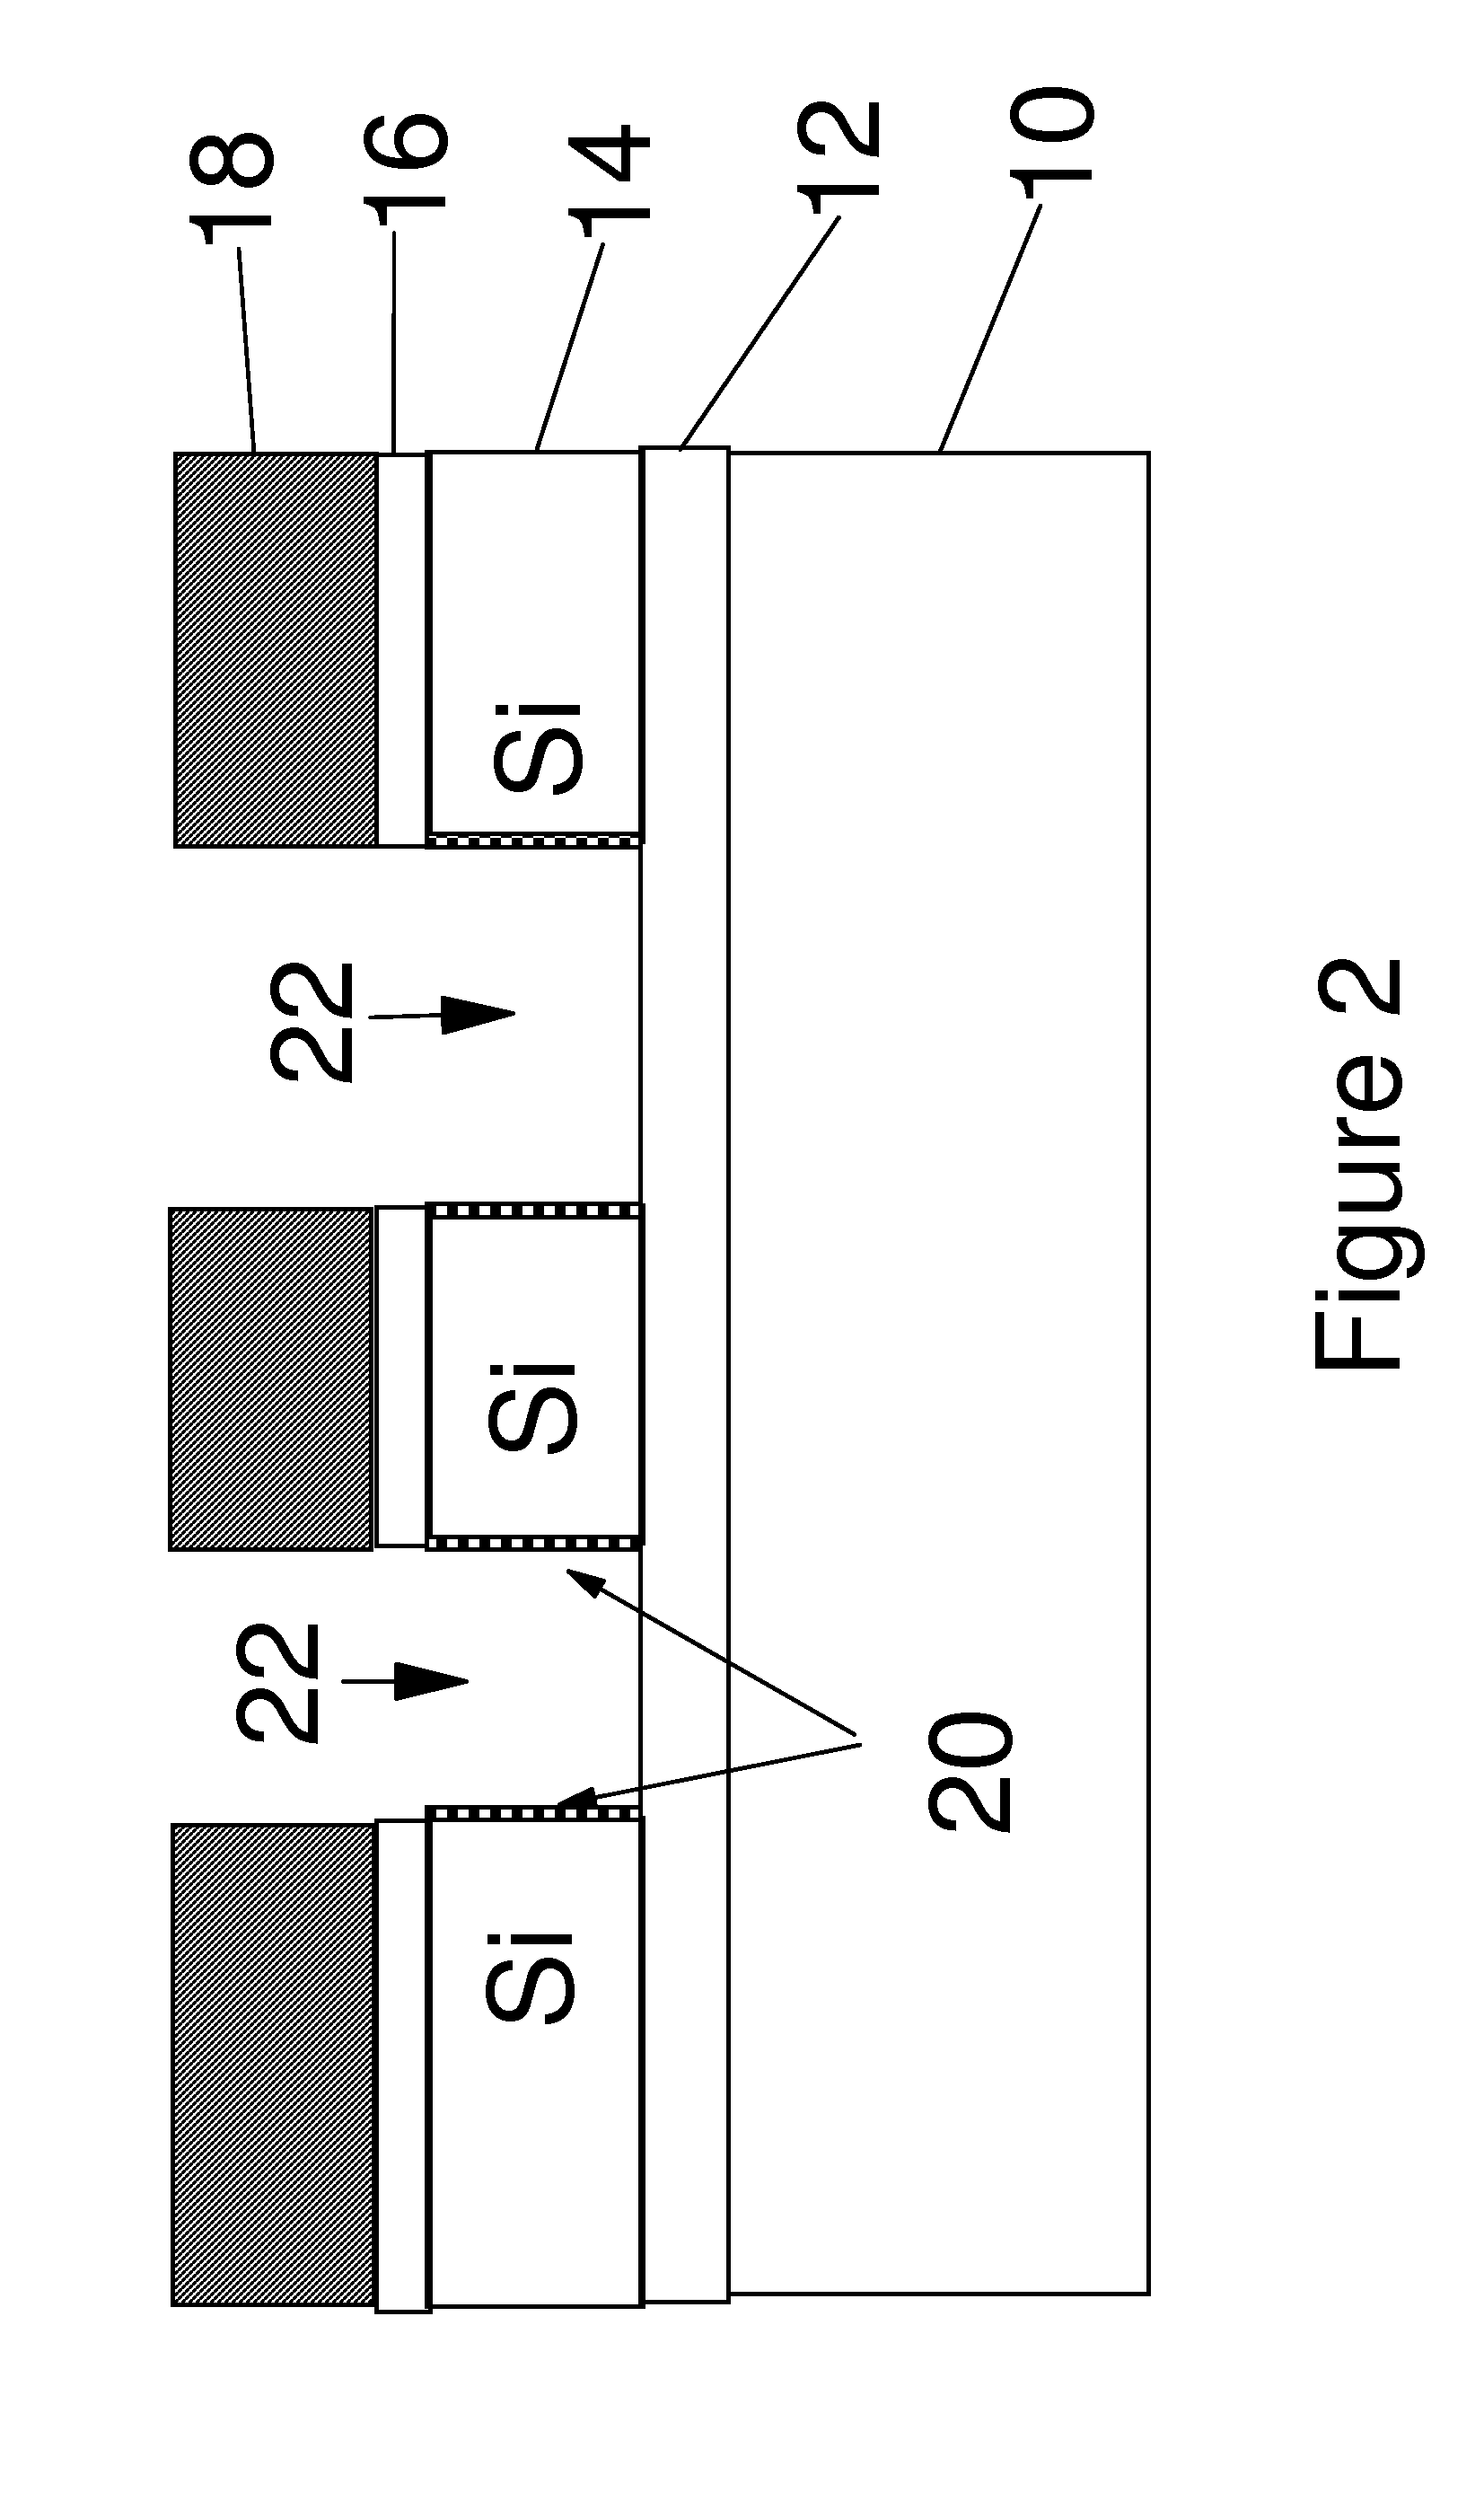 Multiple-gate device with floating back gate